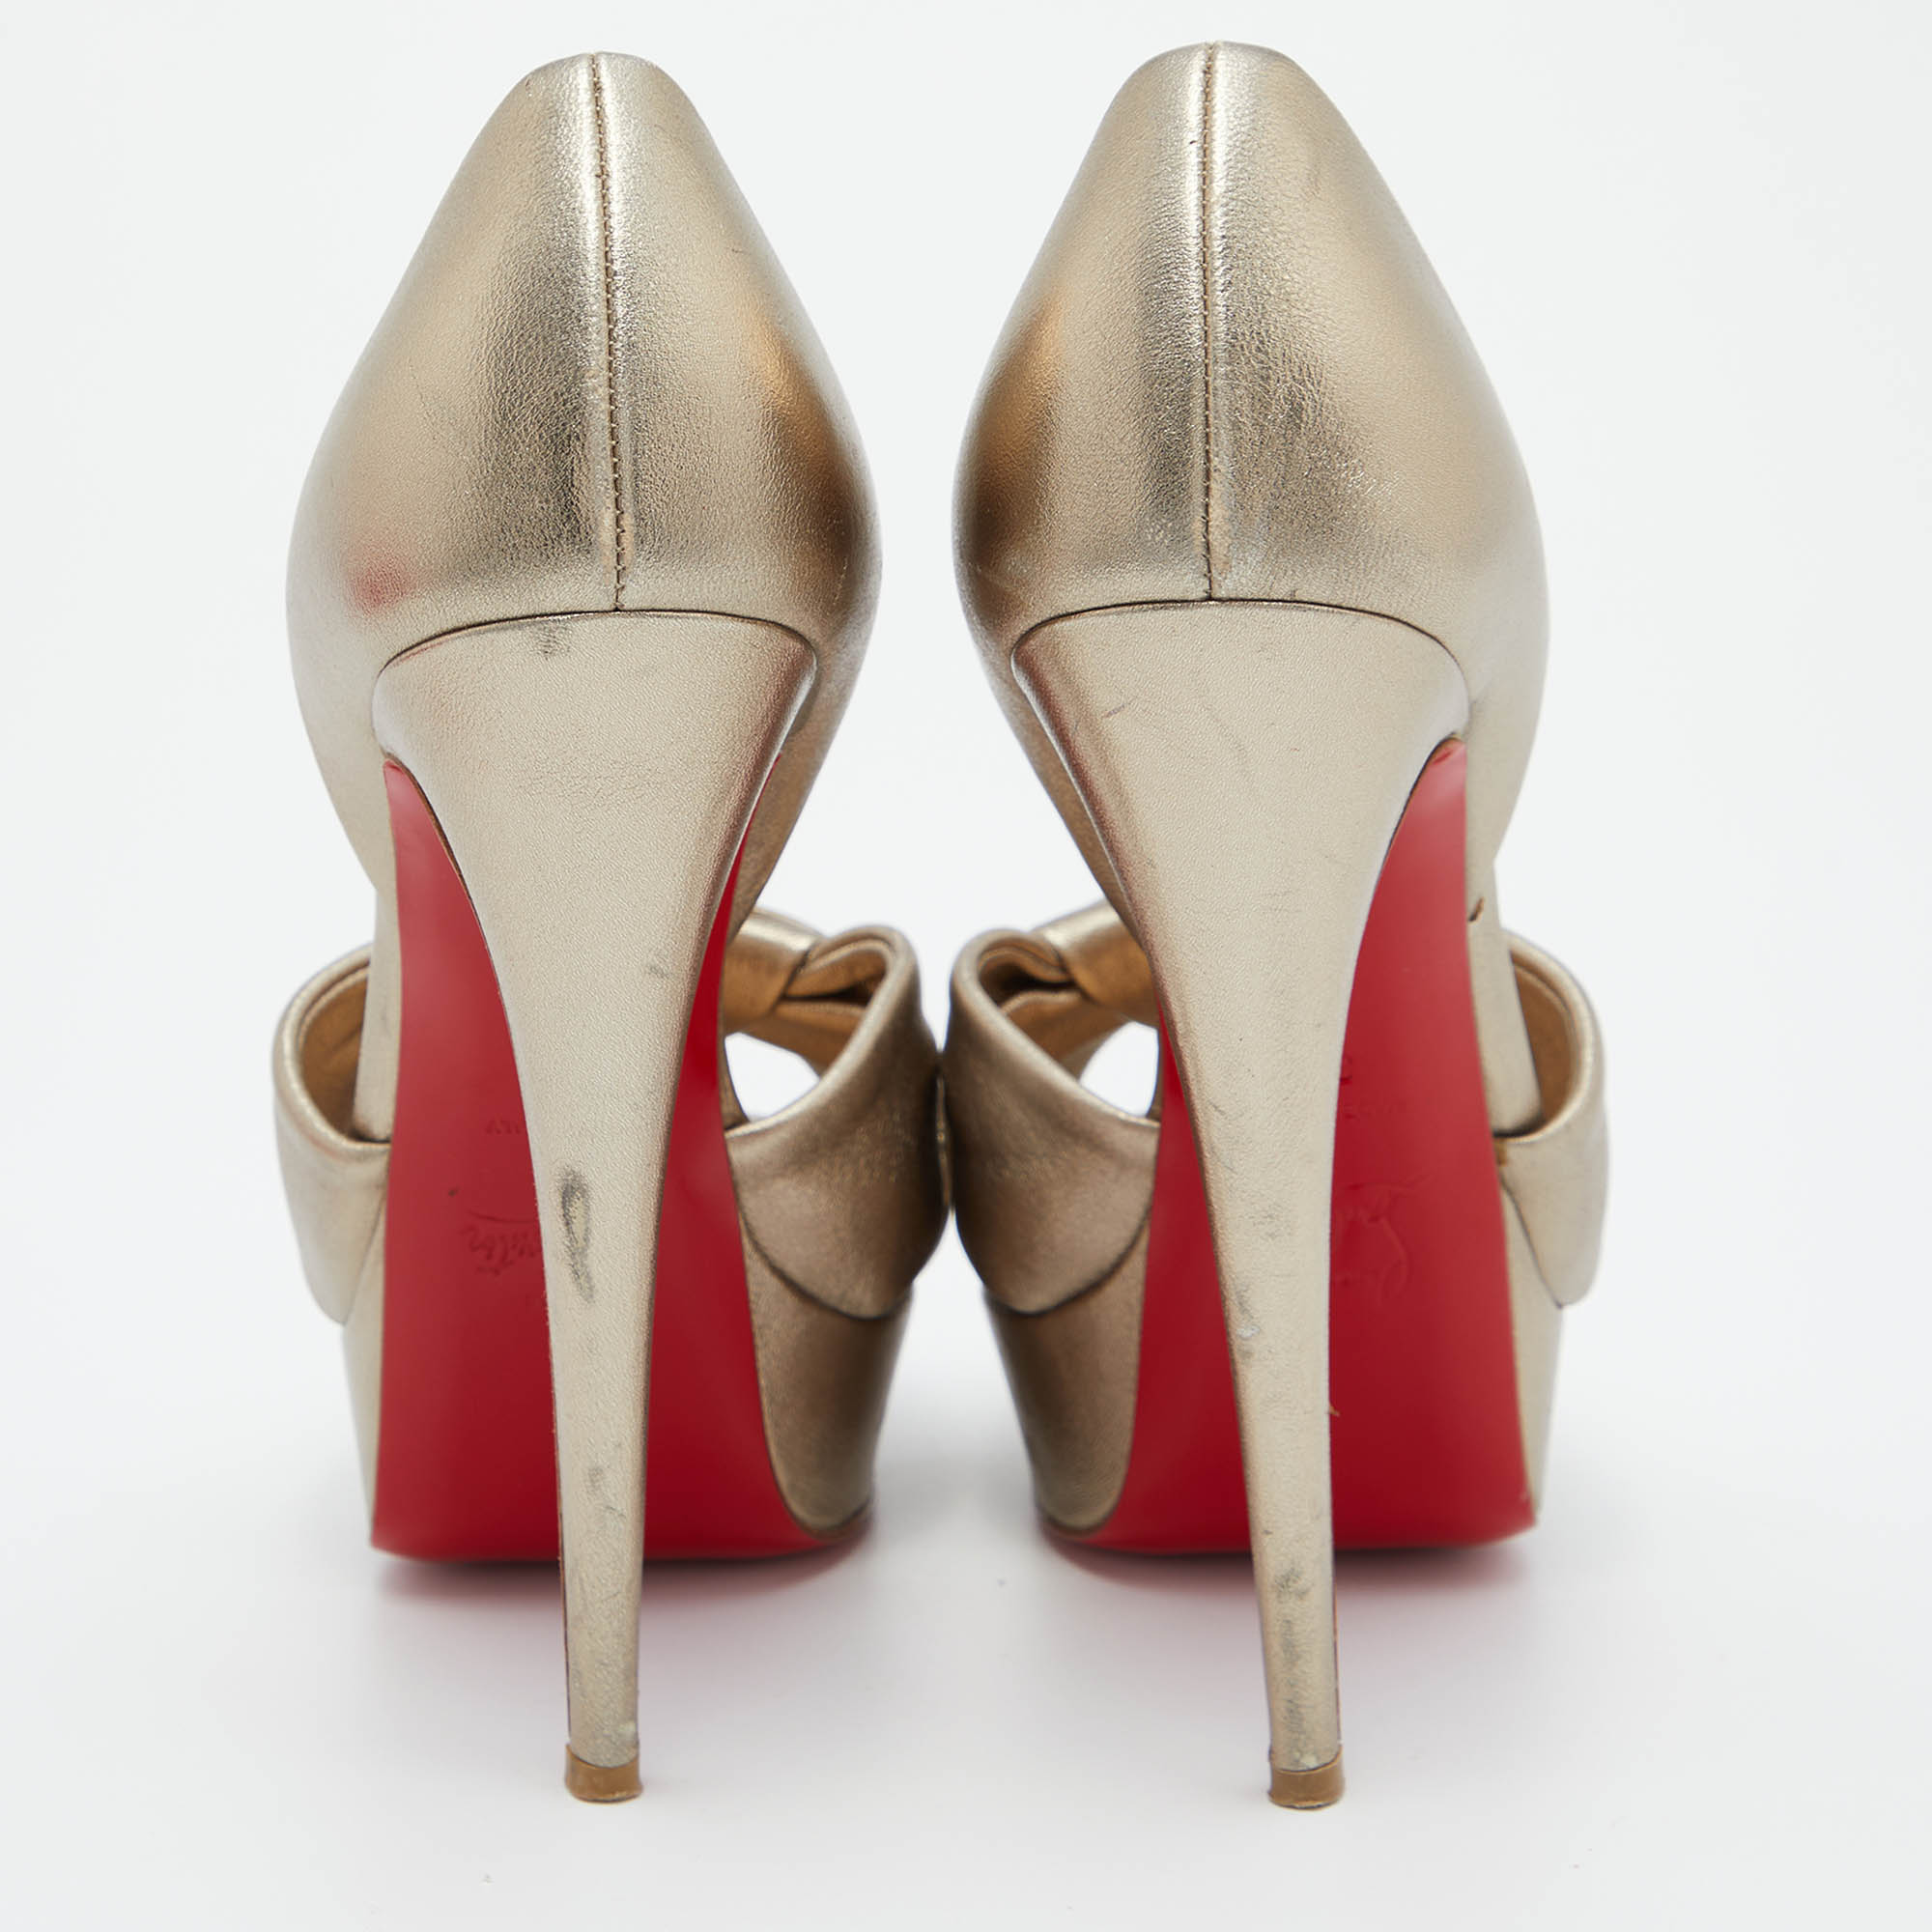 Christian Louboutin Gold Leather Volpi D'orsay Pumps Size 38